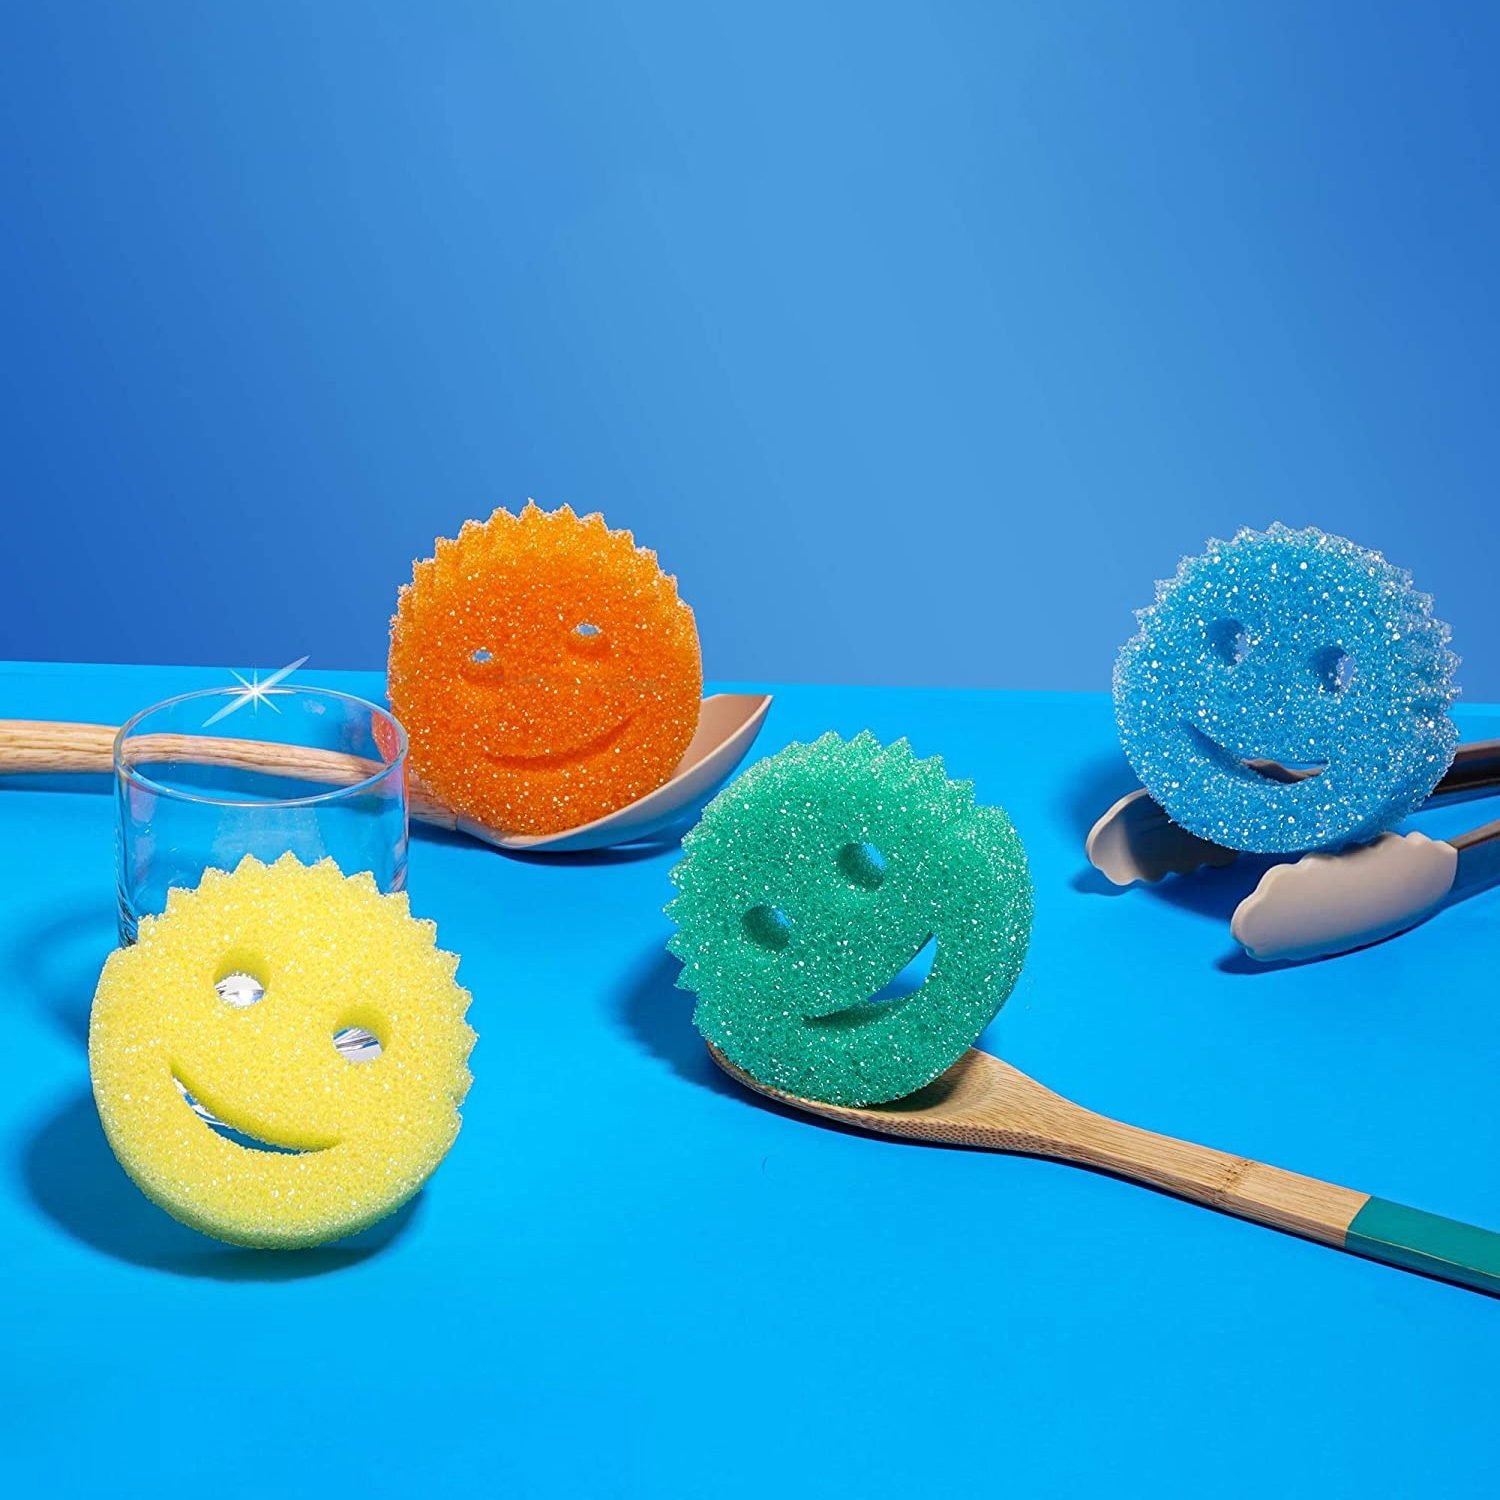 What Is a Scrub Daddy Sponge and Why Do Housekeepers Love Them?